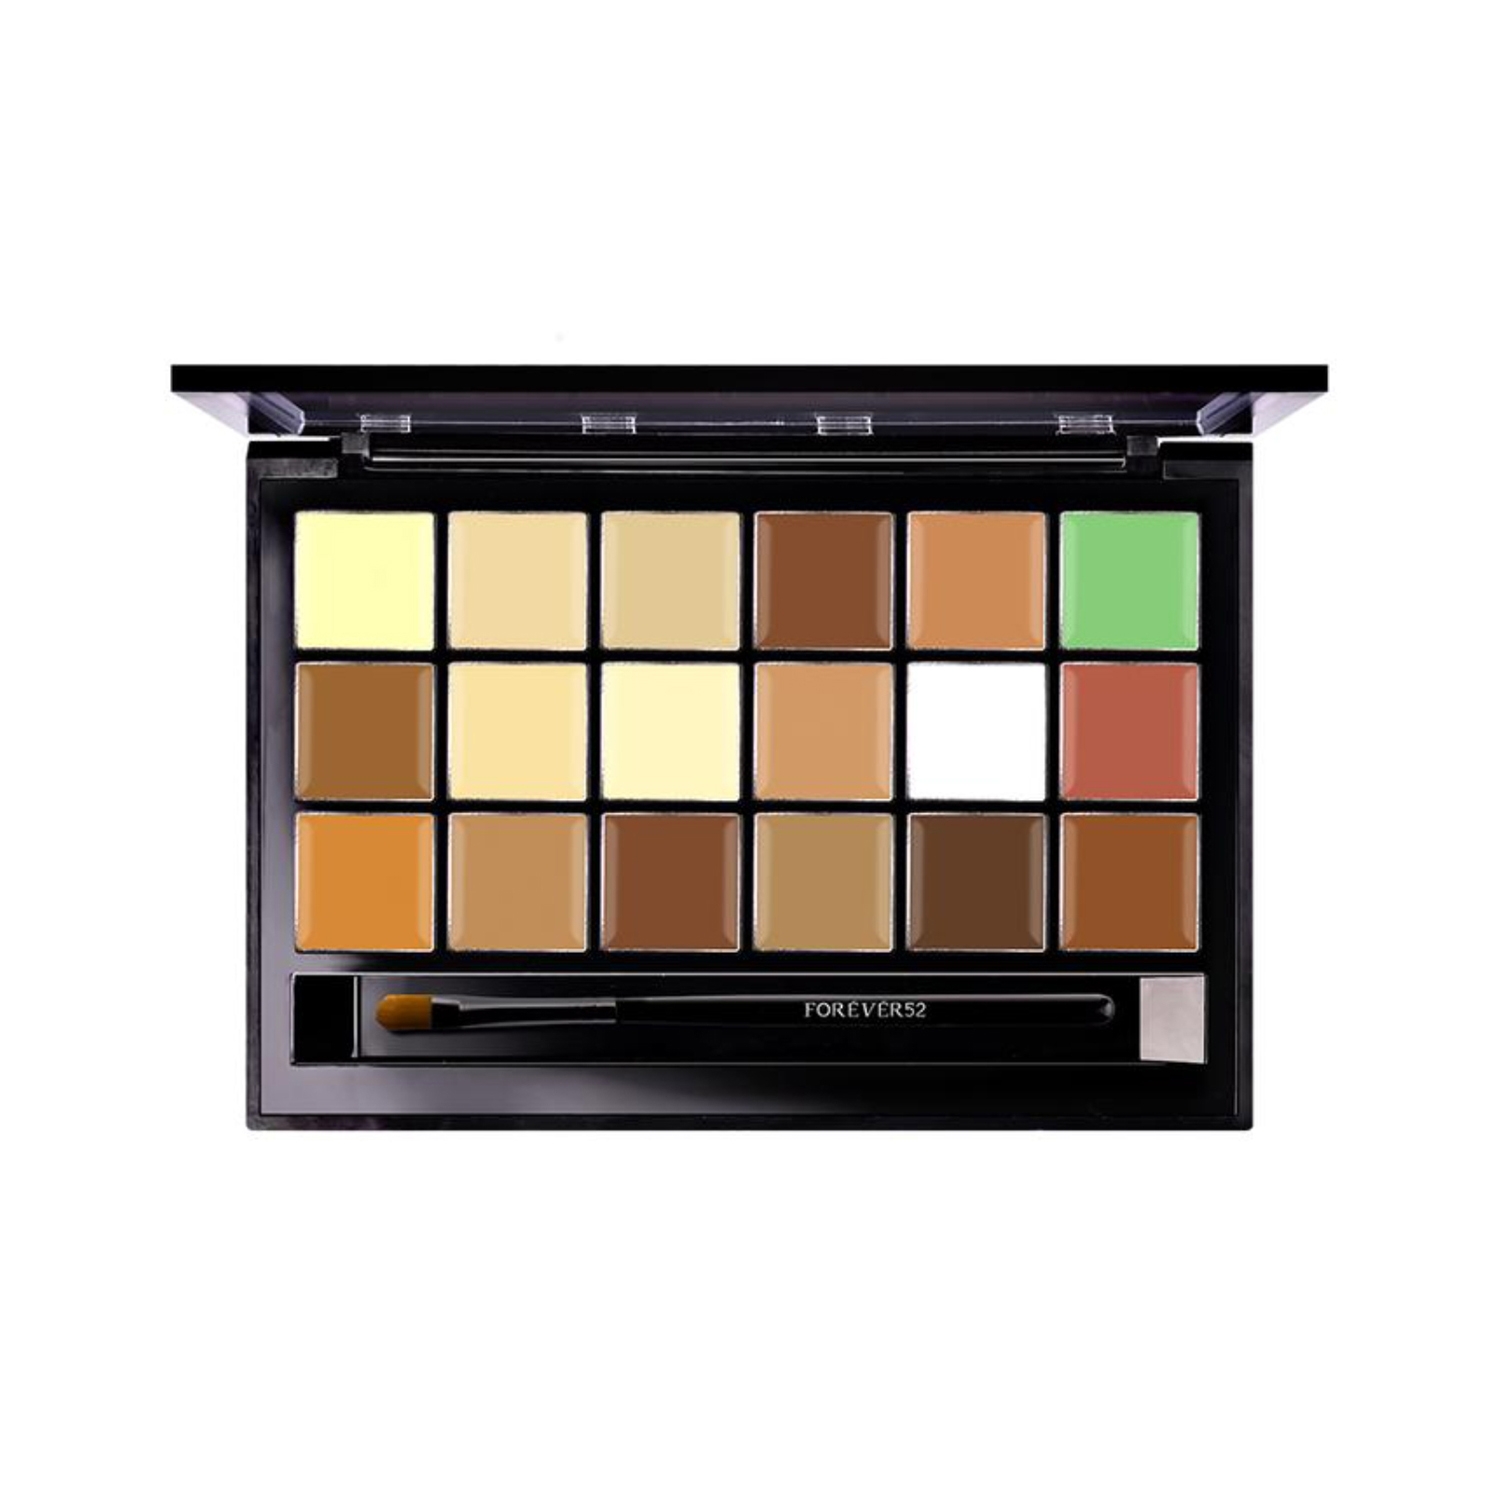 Daily Life Forever52 | Daily Life Forever52 Multitasker Corrector Palette MPC001 (36gm)